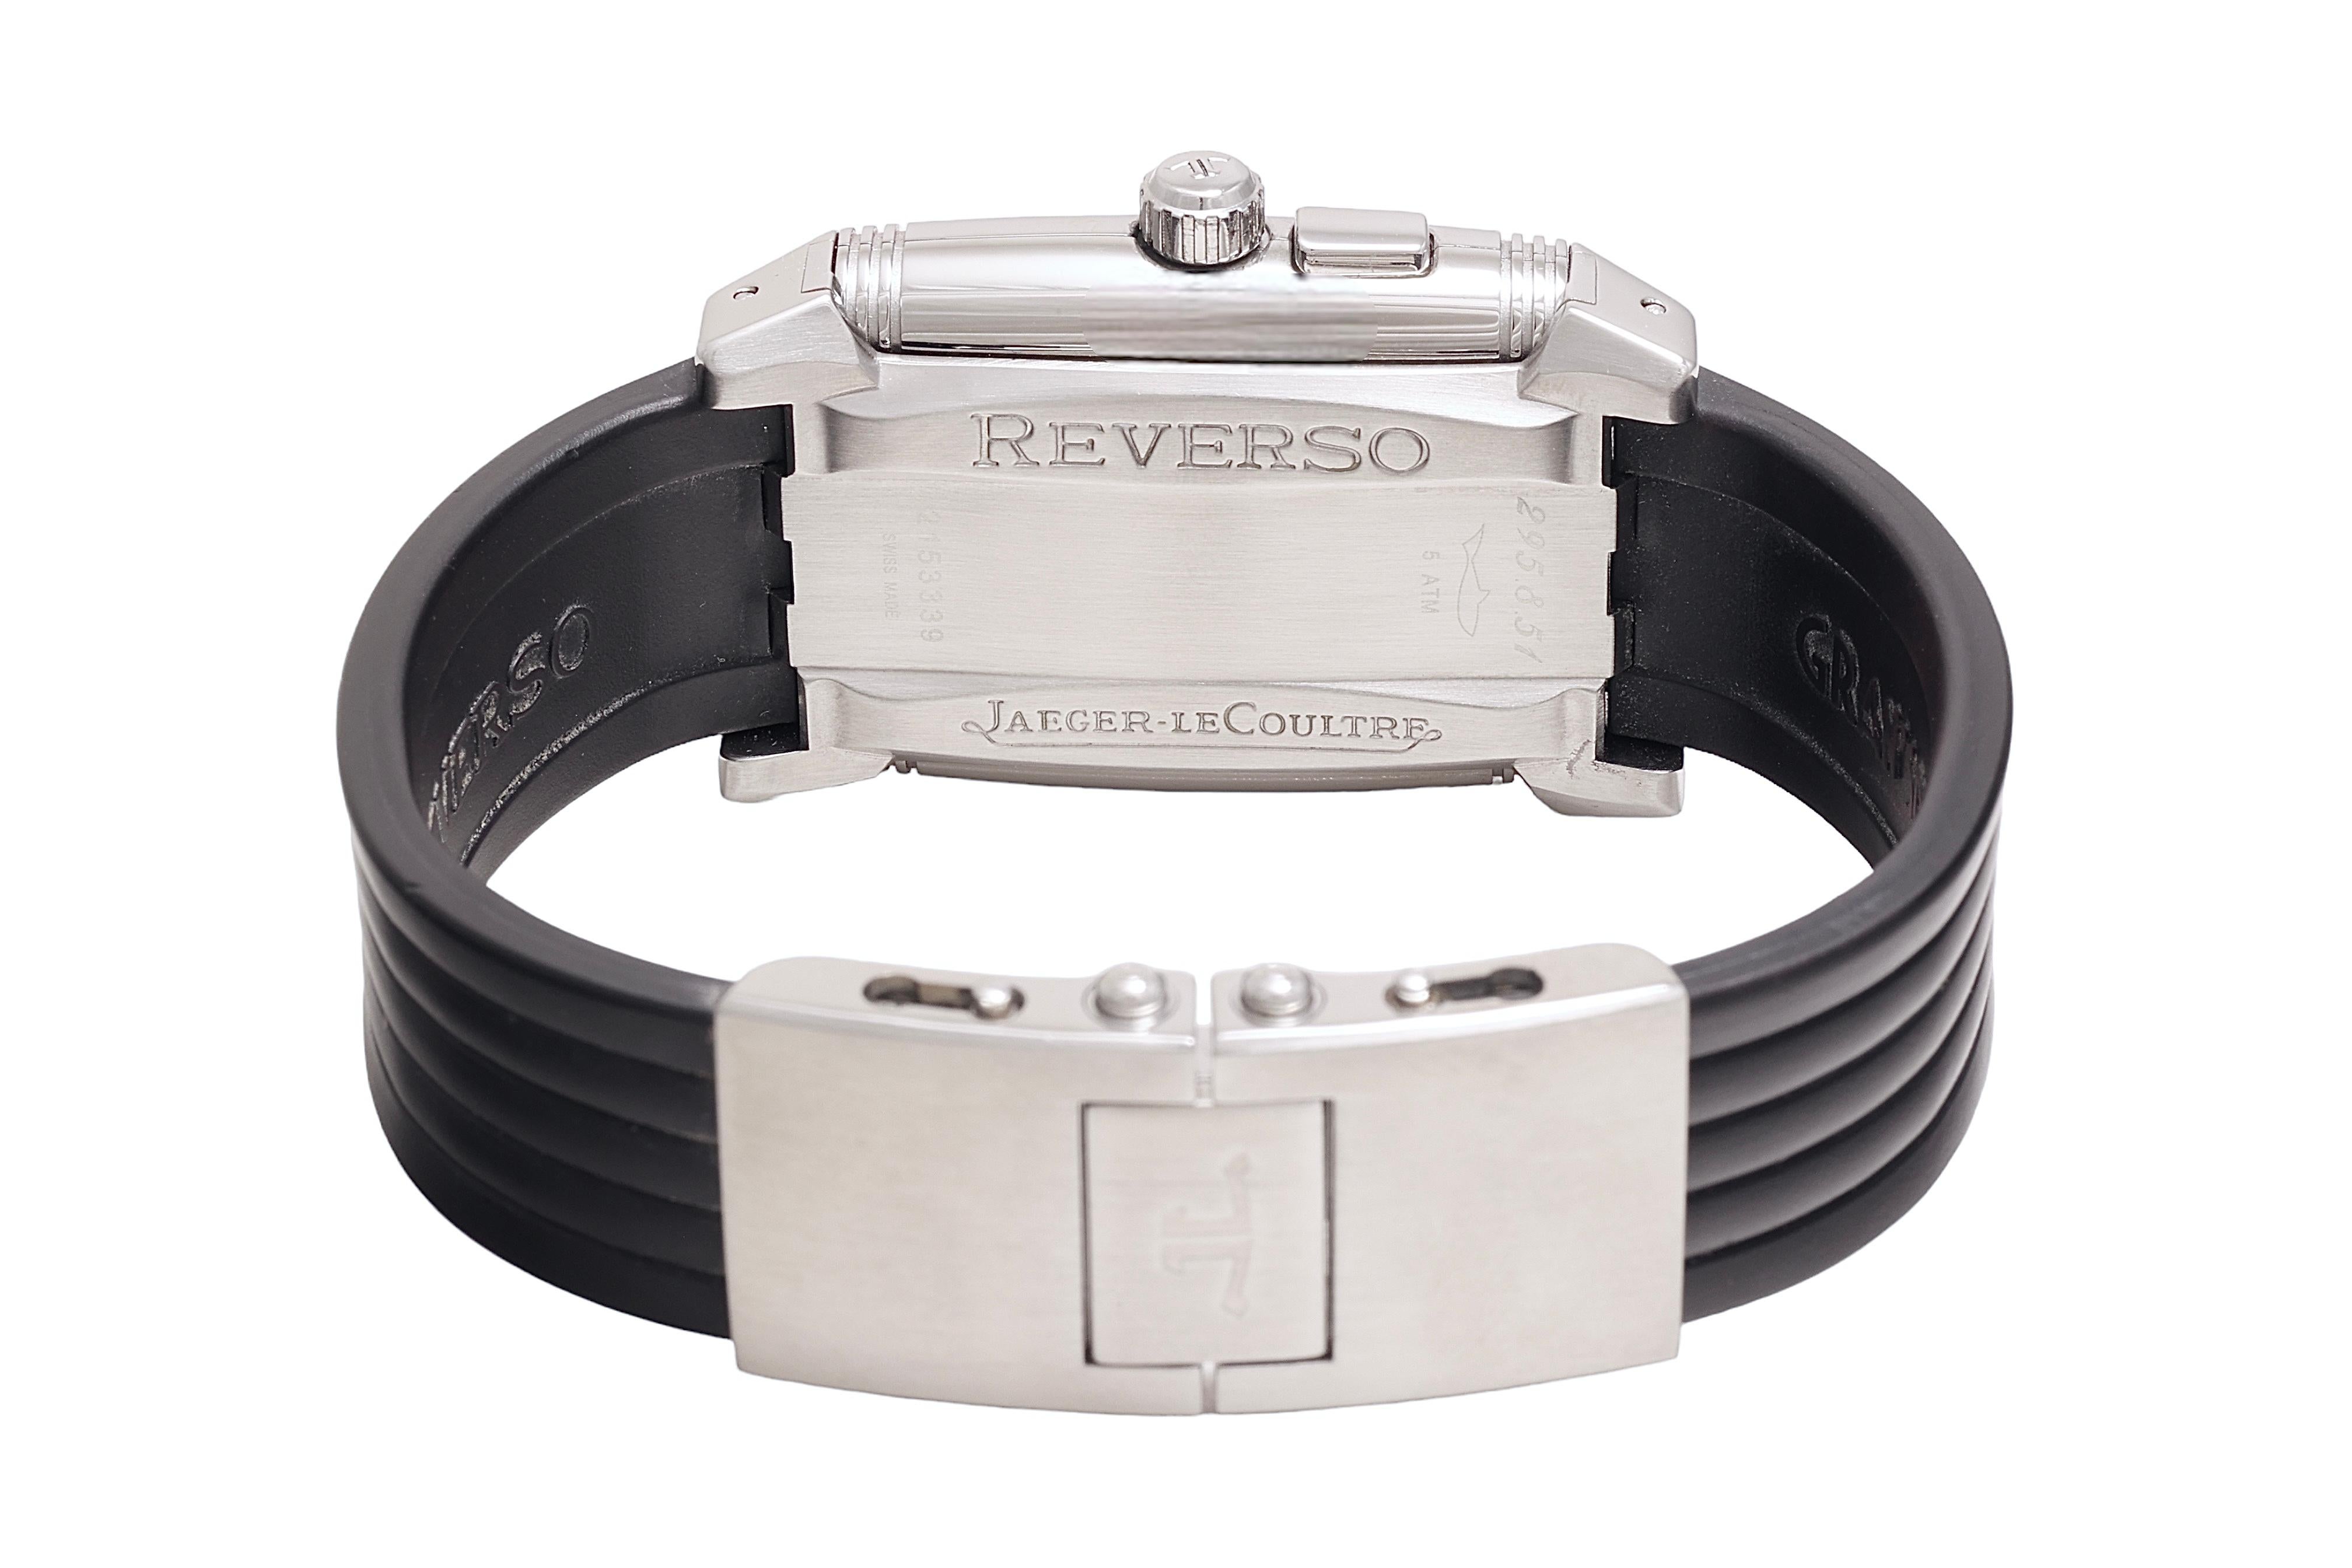 Jaeger LeCoultre Reverso, Gran Sport, Duo Face, GMT, Stahl, Ref 295.8.51 im Angebot 4